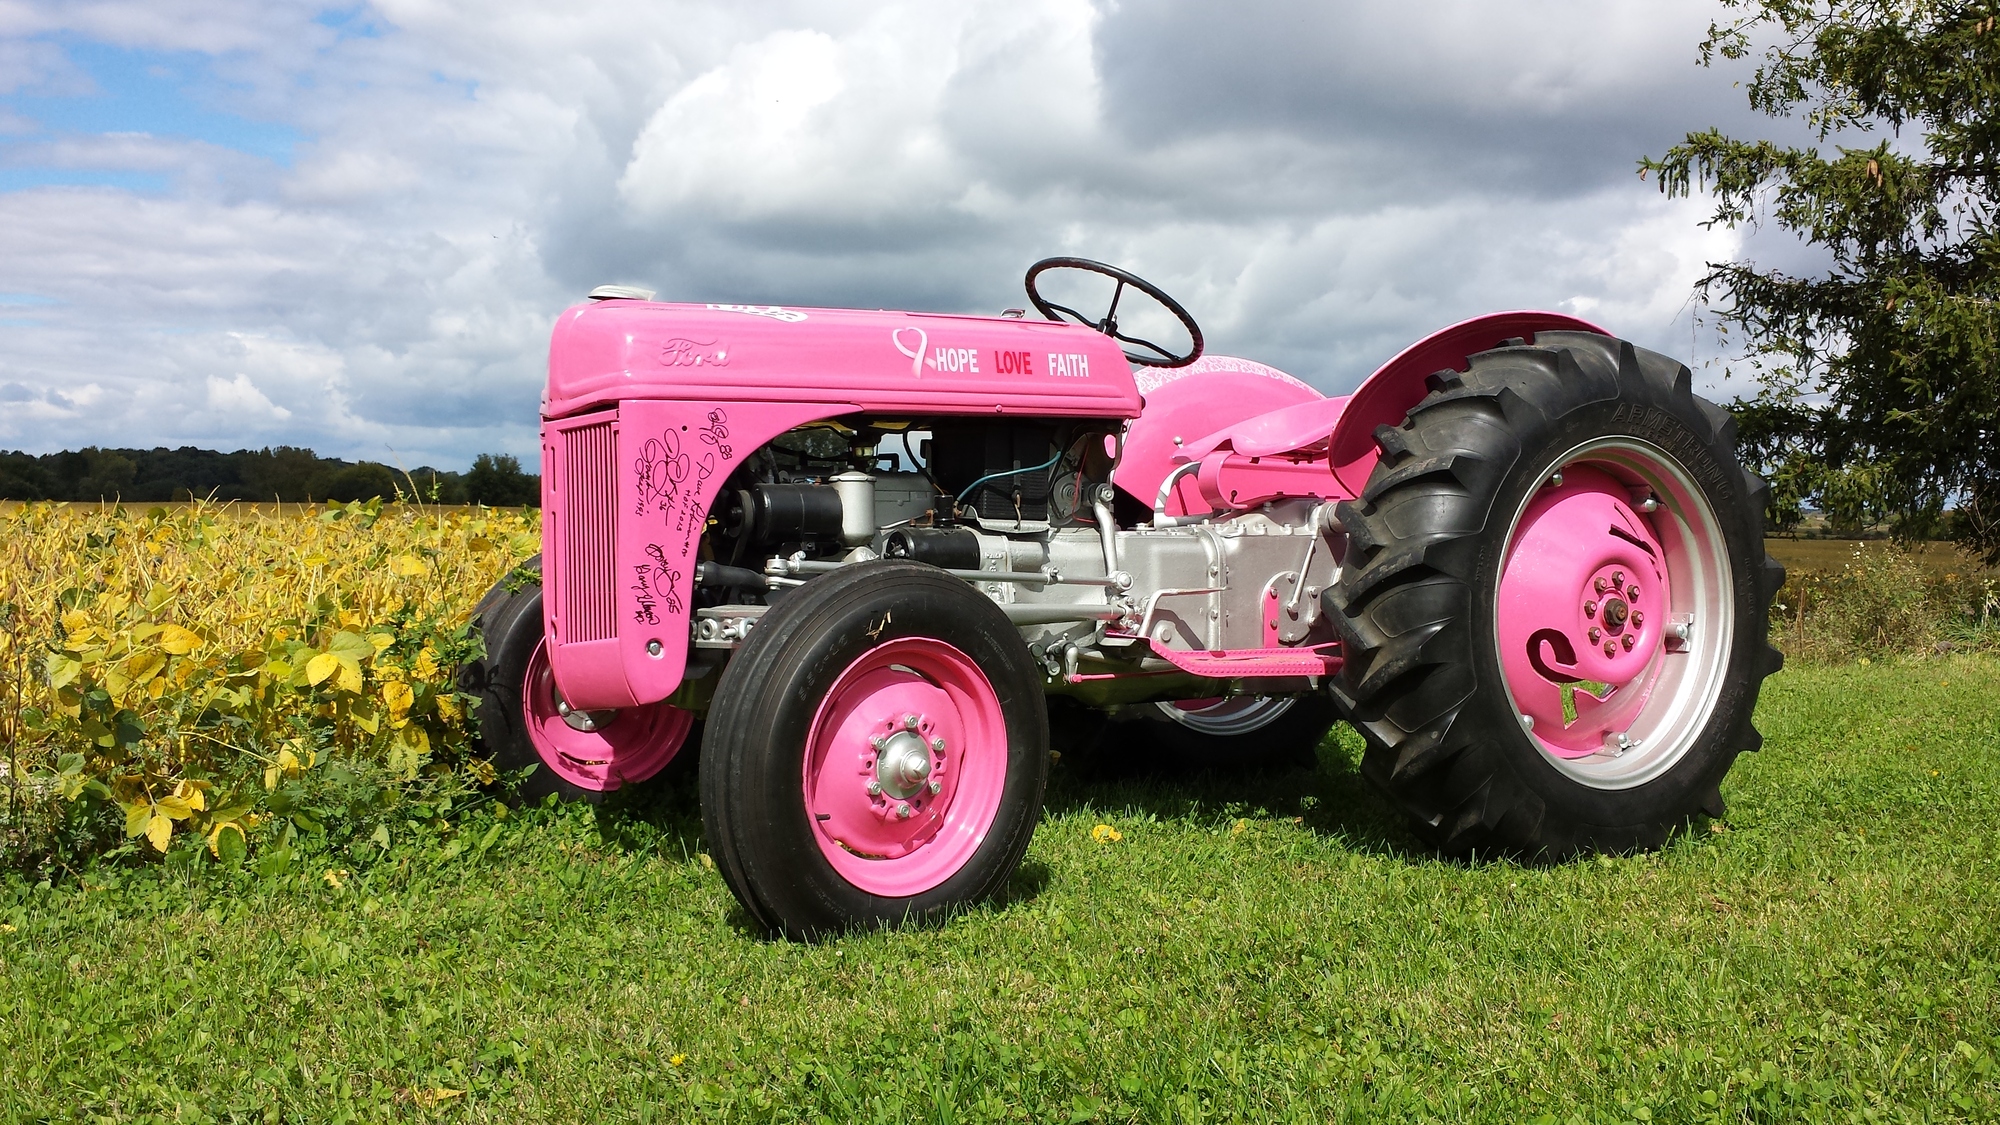 8n Ford Pink Tractor Tractors Antique Pontel Kevin Think Comment Thomas Ant...